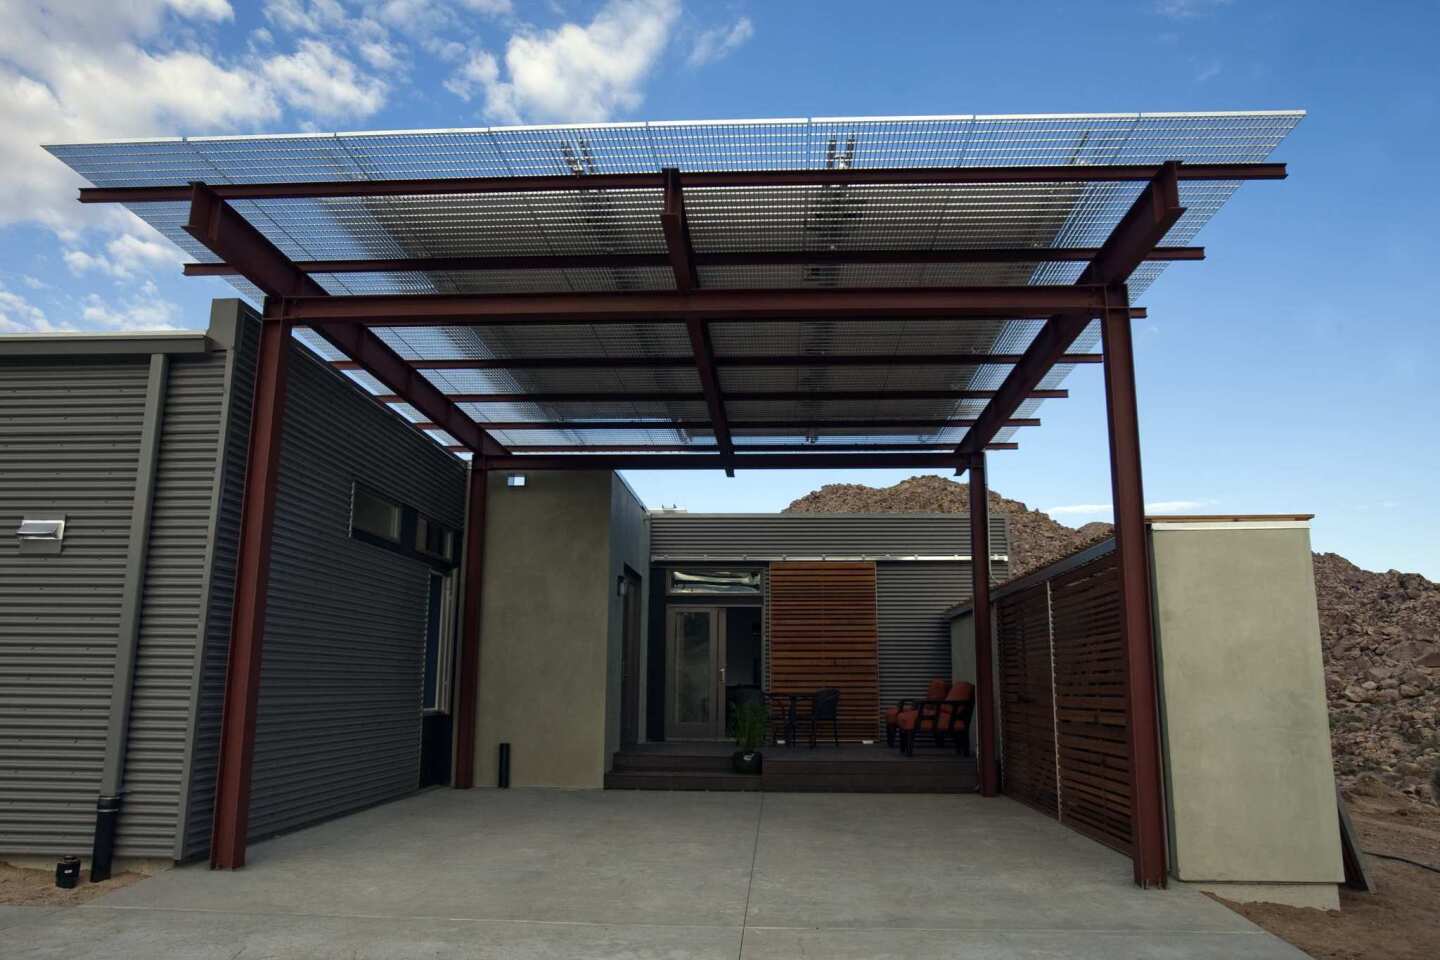 On one side of the house, a carport in front is topped with solar panels. A small deck is tucked by a door to the kitchen. Mechanical systems are hidden behind more cedar-slat panels on the right.